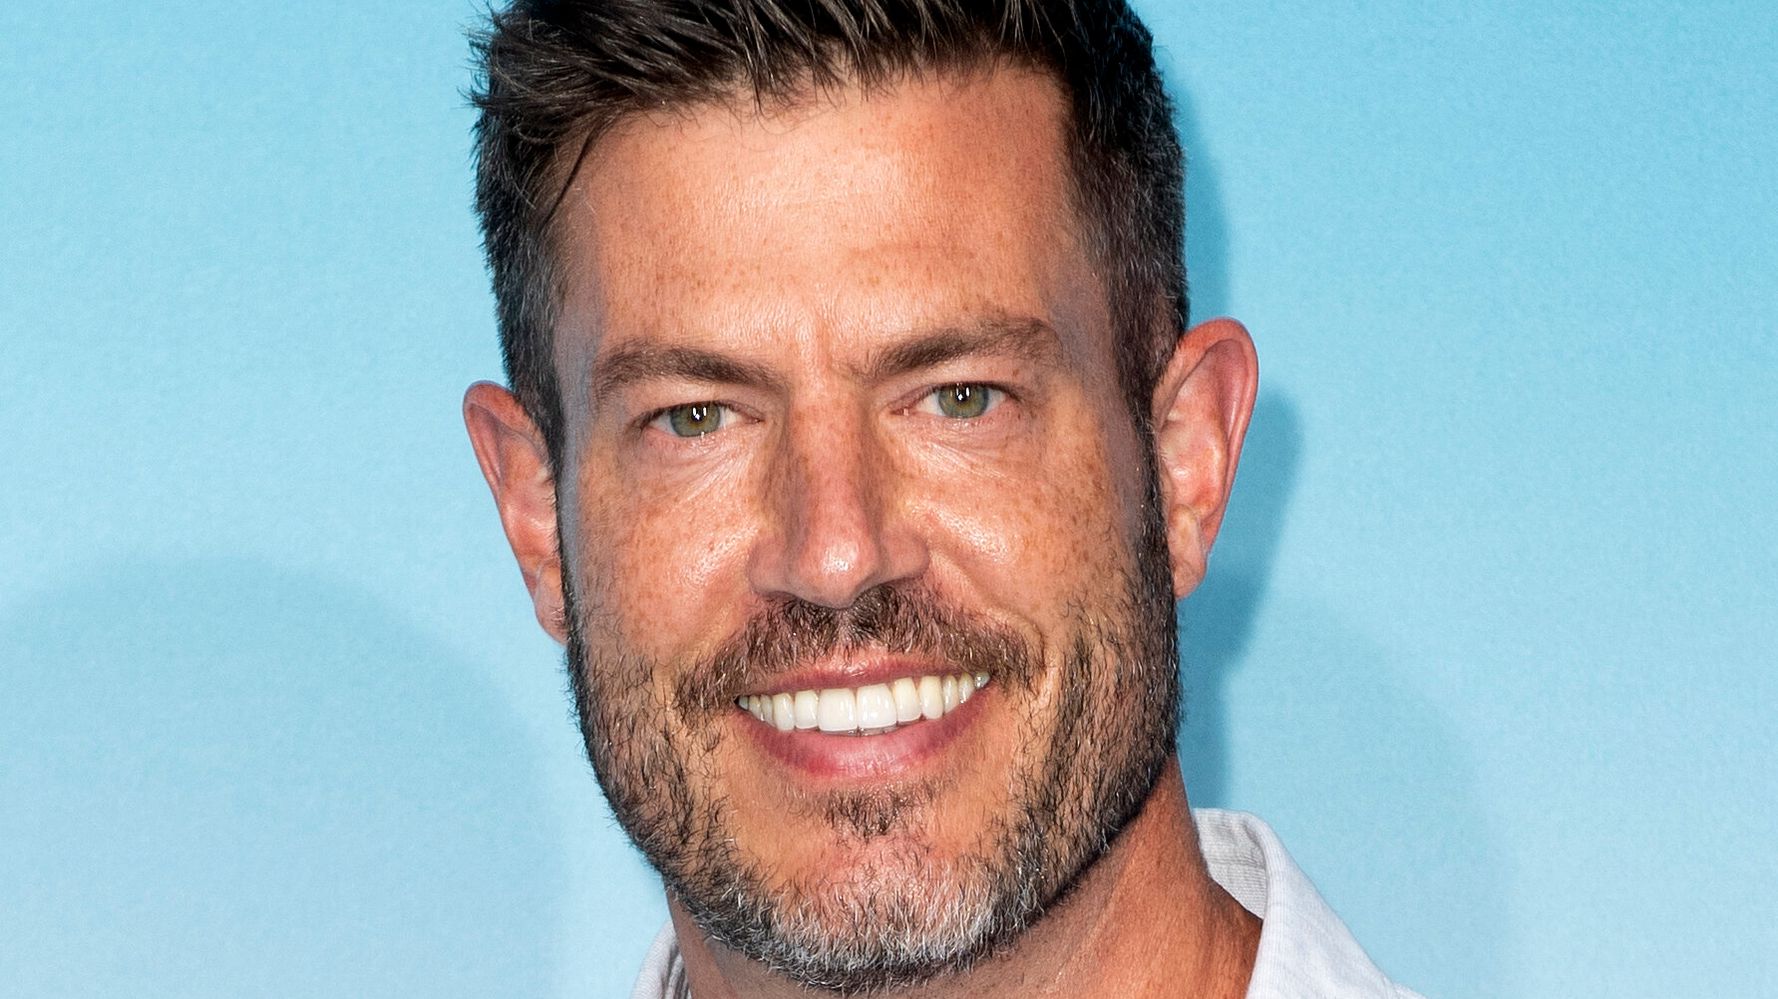 Former 'Bachelor' Contestant Jesse Palmer To Replace Chris Harrison As Host